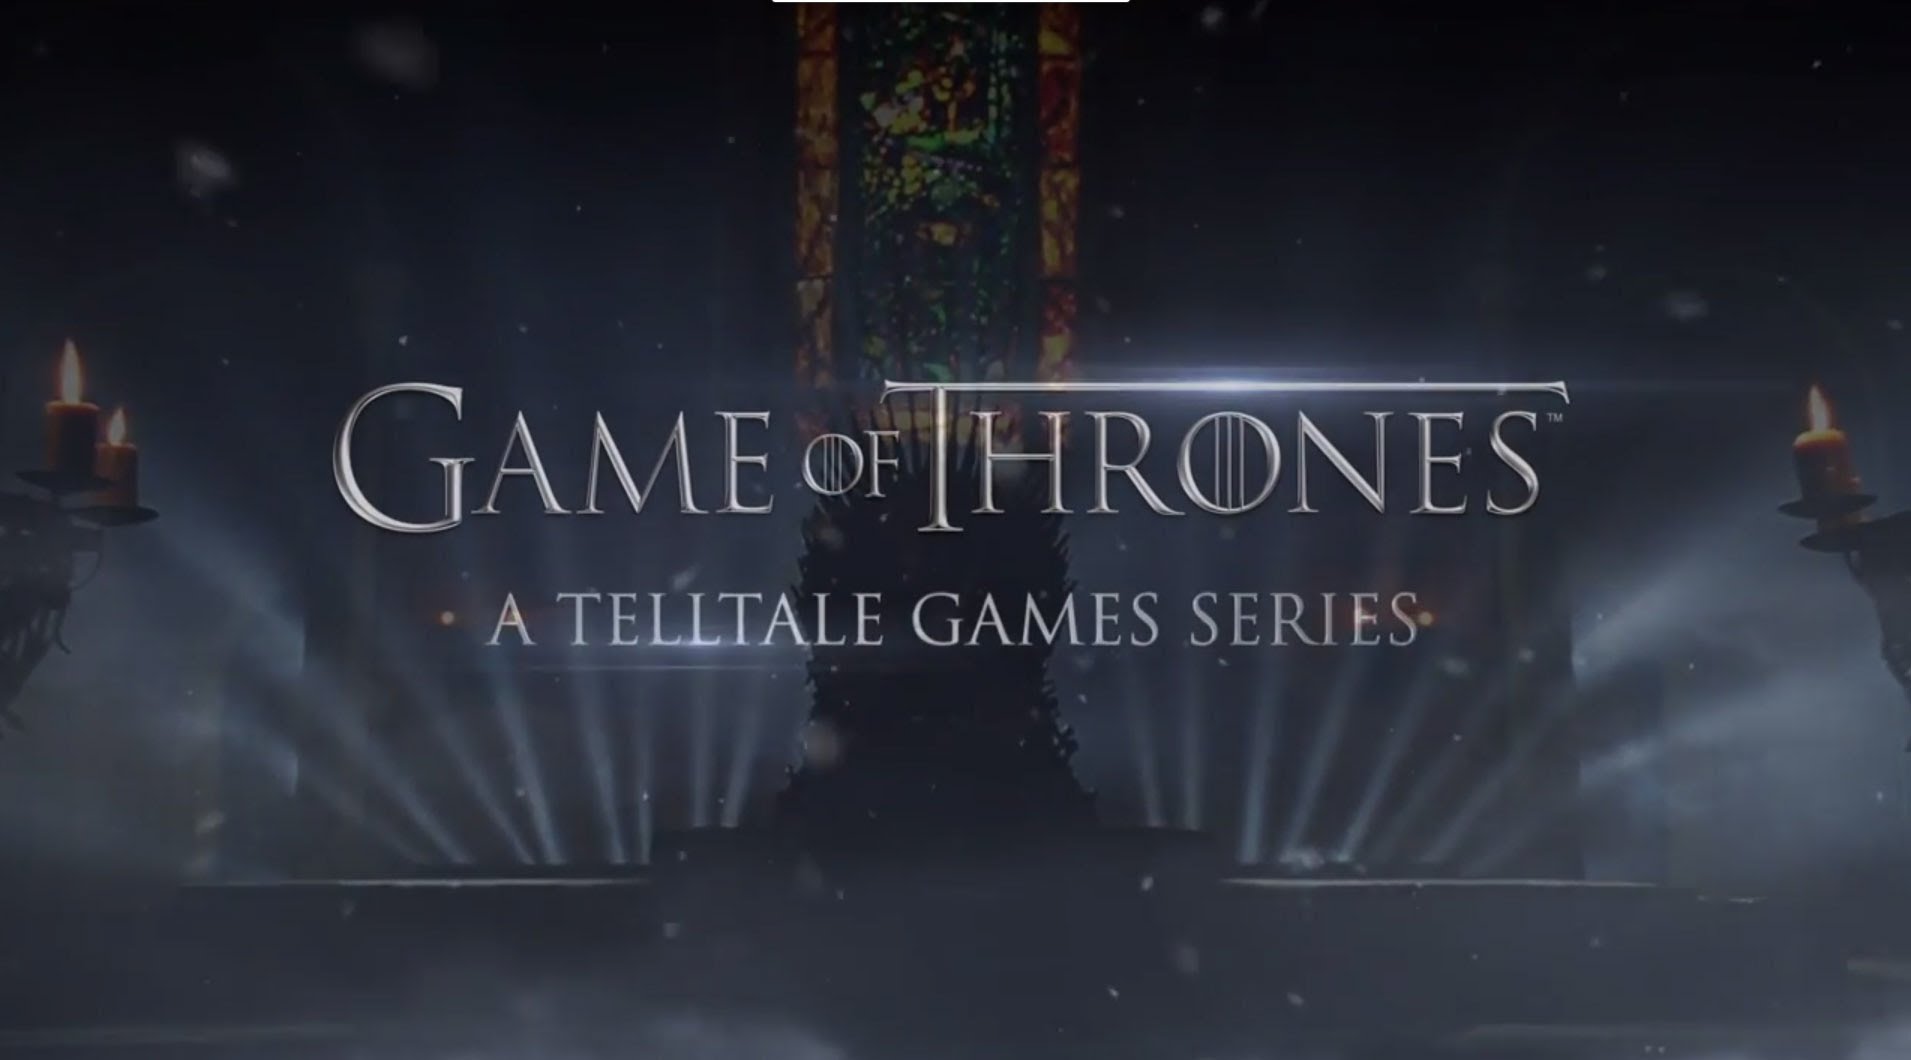 TellTale Games’ “Game of Thrones” To Feature Five Playable Characters - Characters Are All from the Same Family